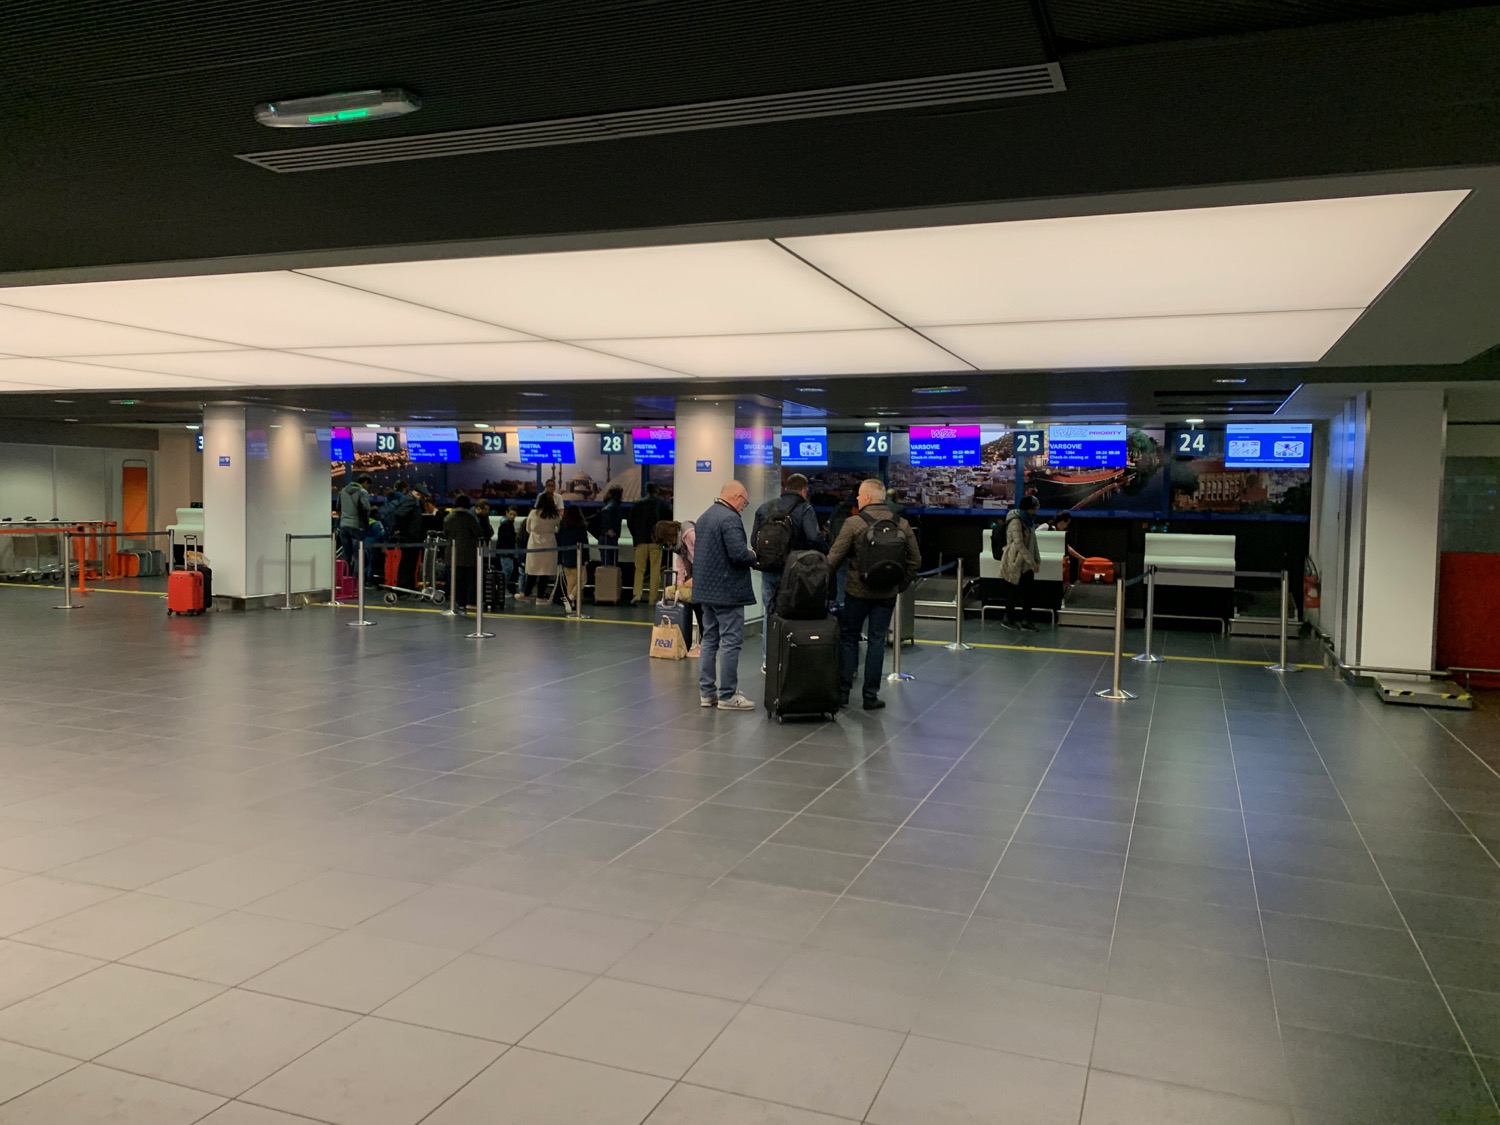 people standing in a line in a terminal